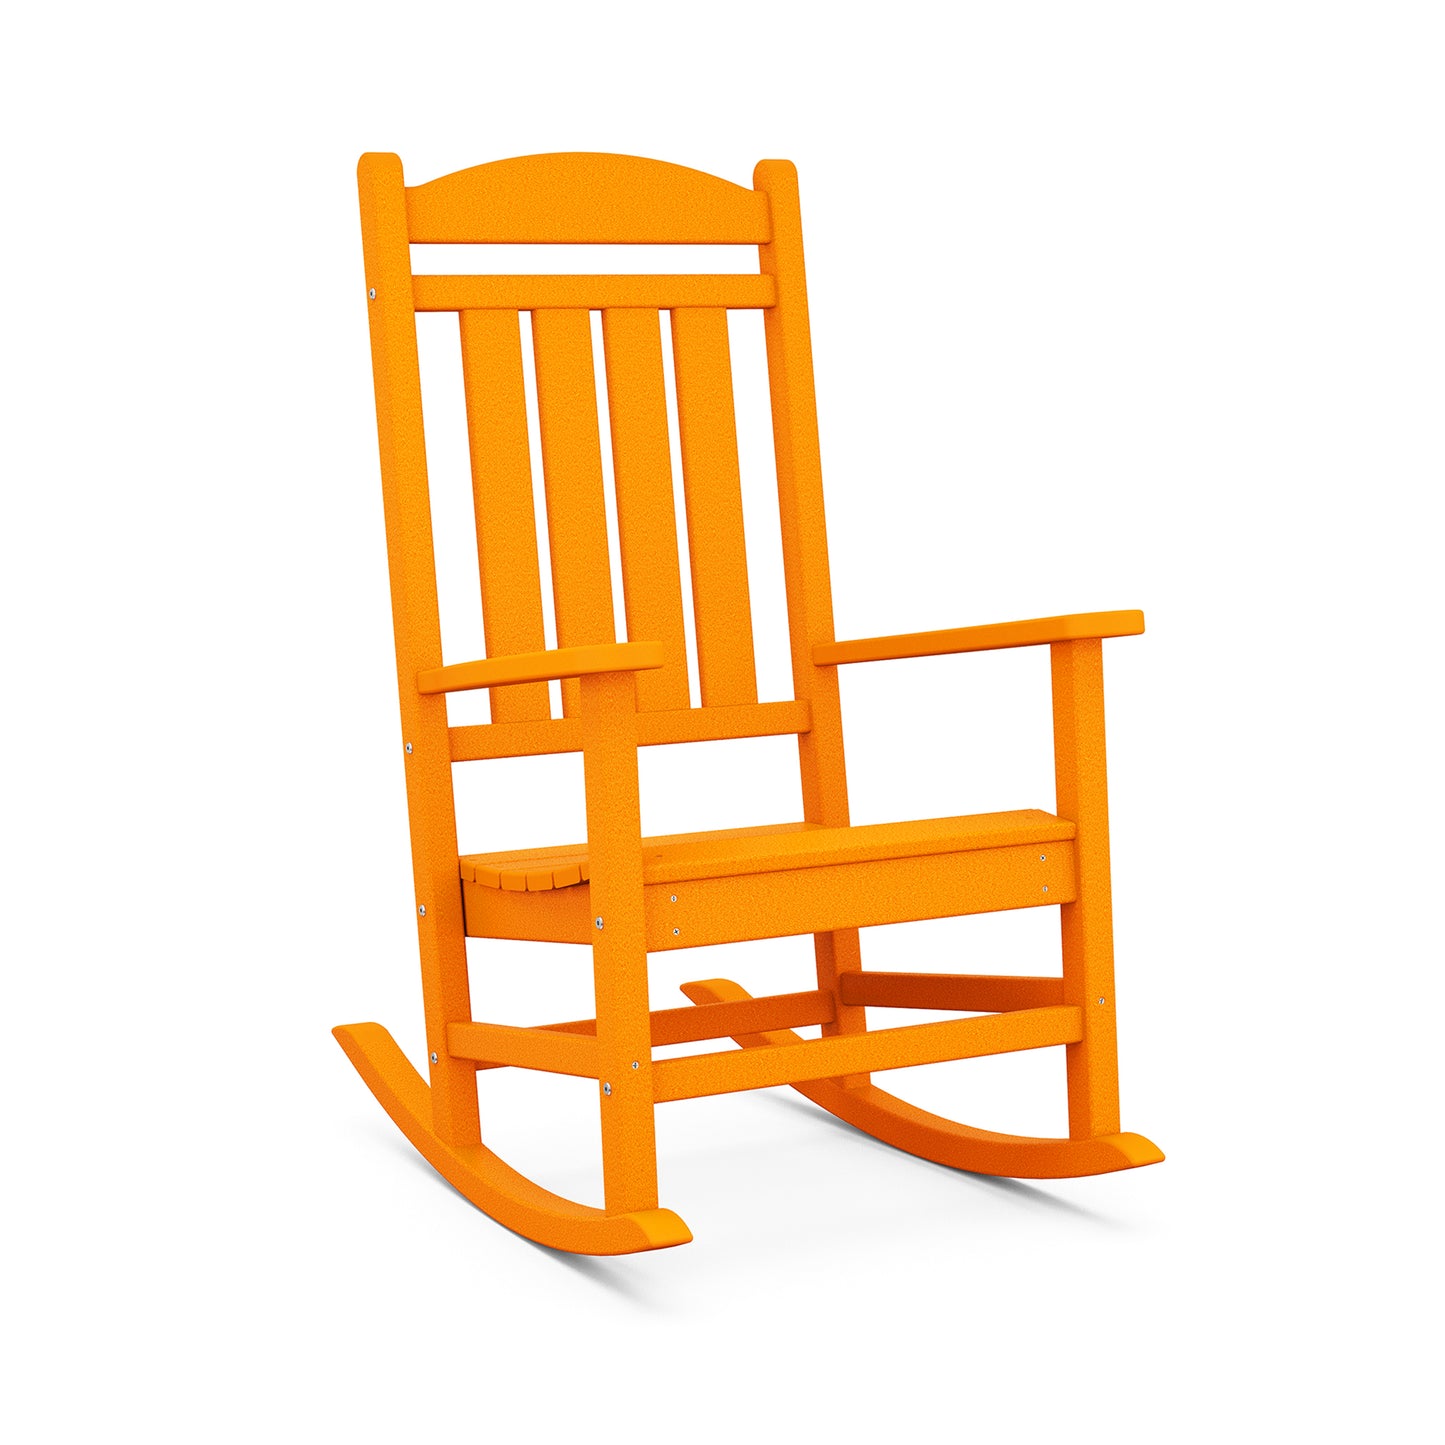 Bright orange POLYWOOD© Presidential Outdoor Rocking Chair isolated on a white background. The chair features vertical slats on the backrest and a flat seat, with curved rockers at the base.